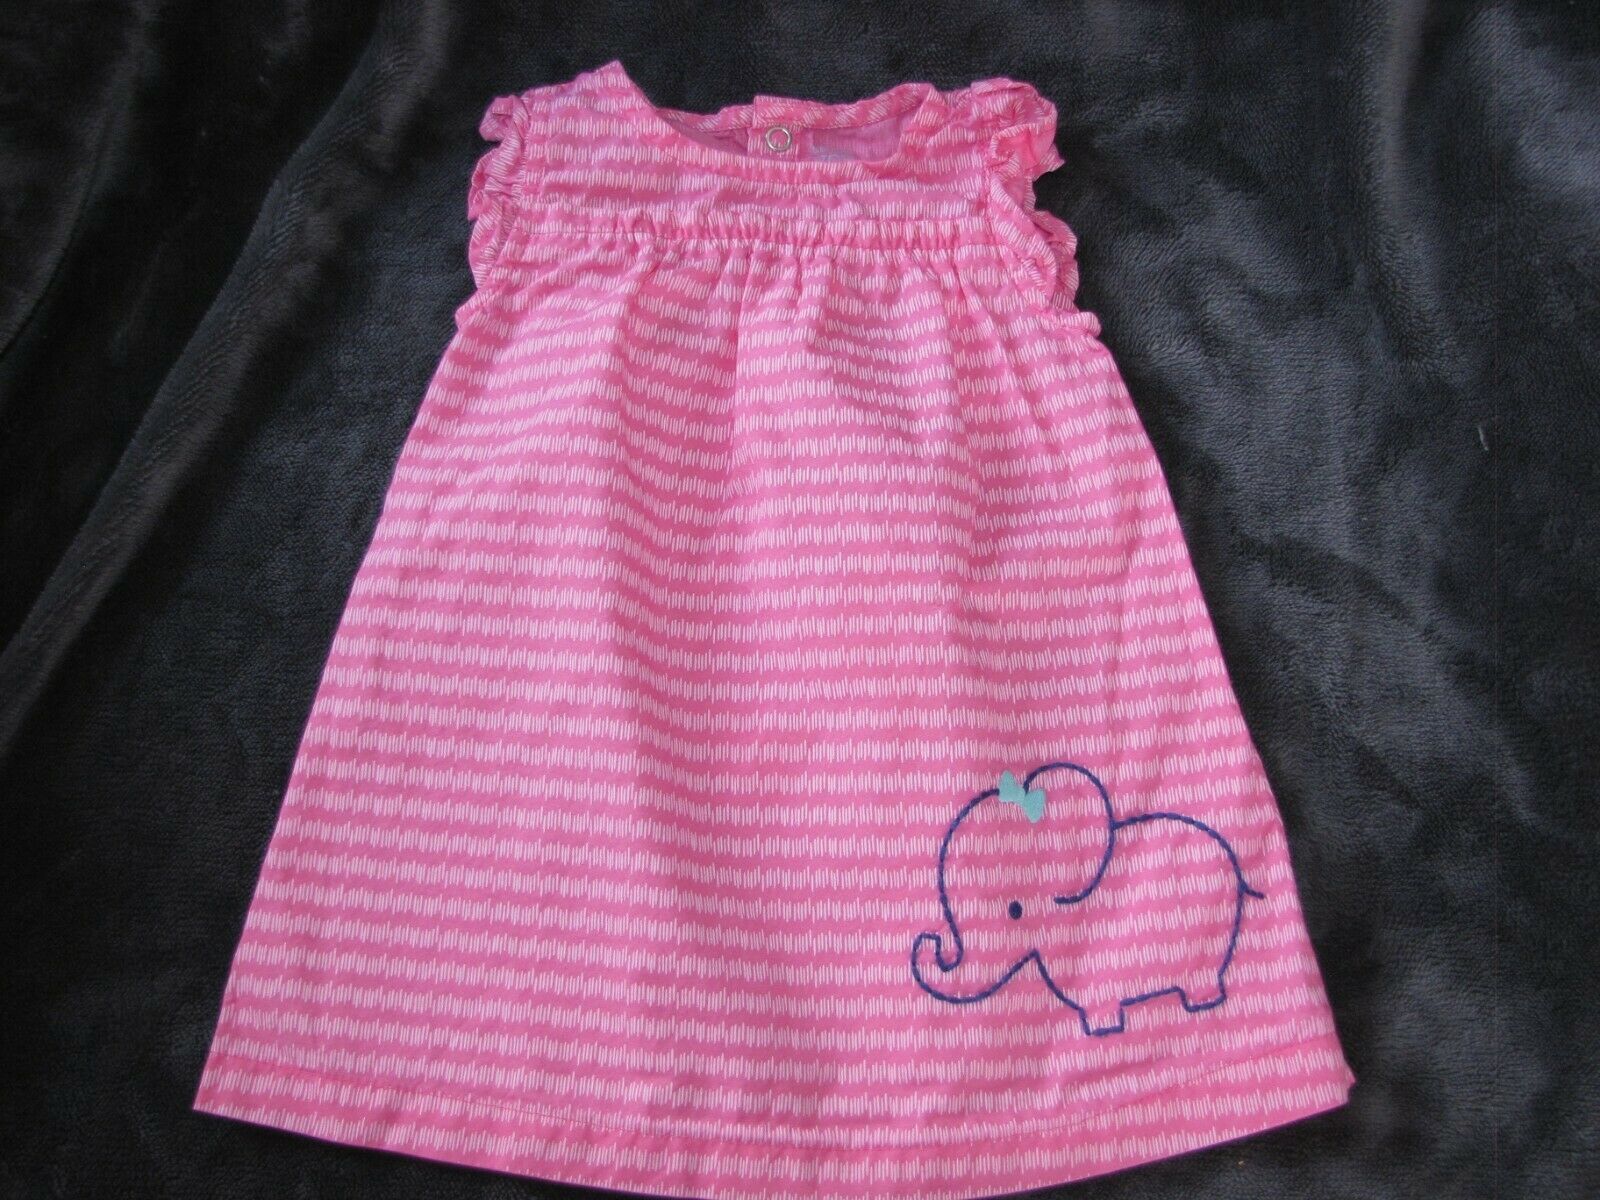 BABY JUST ONE YOU PINK NAVY BLUE ELEPHANT SPRING SUMMER DRESS RUFFLE GIRL 3-6 - $11.87